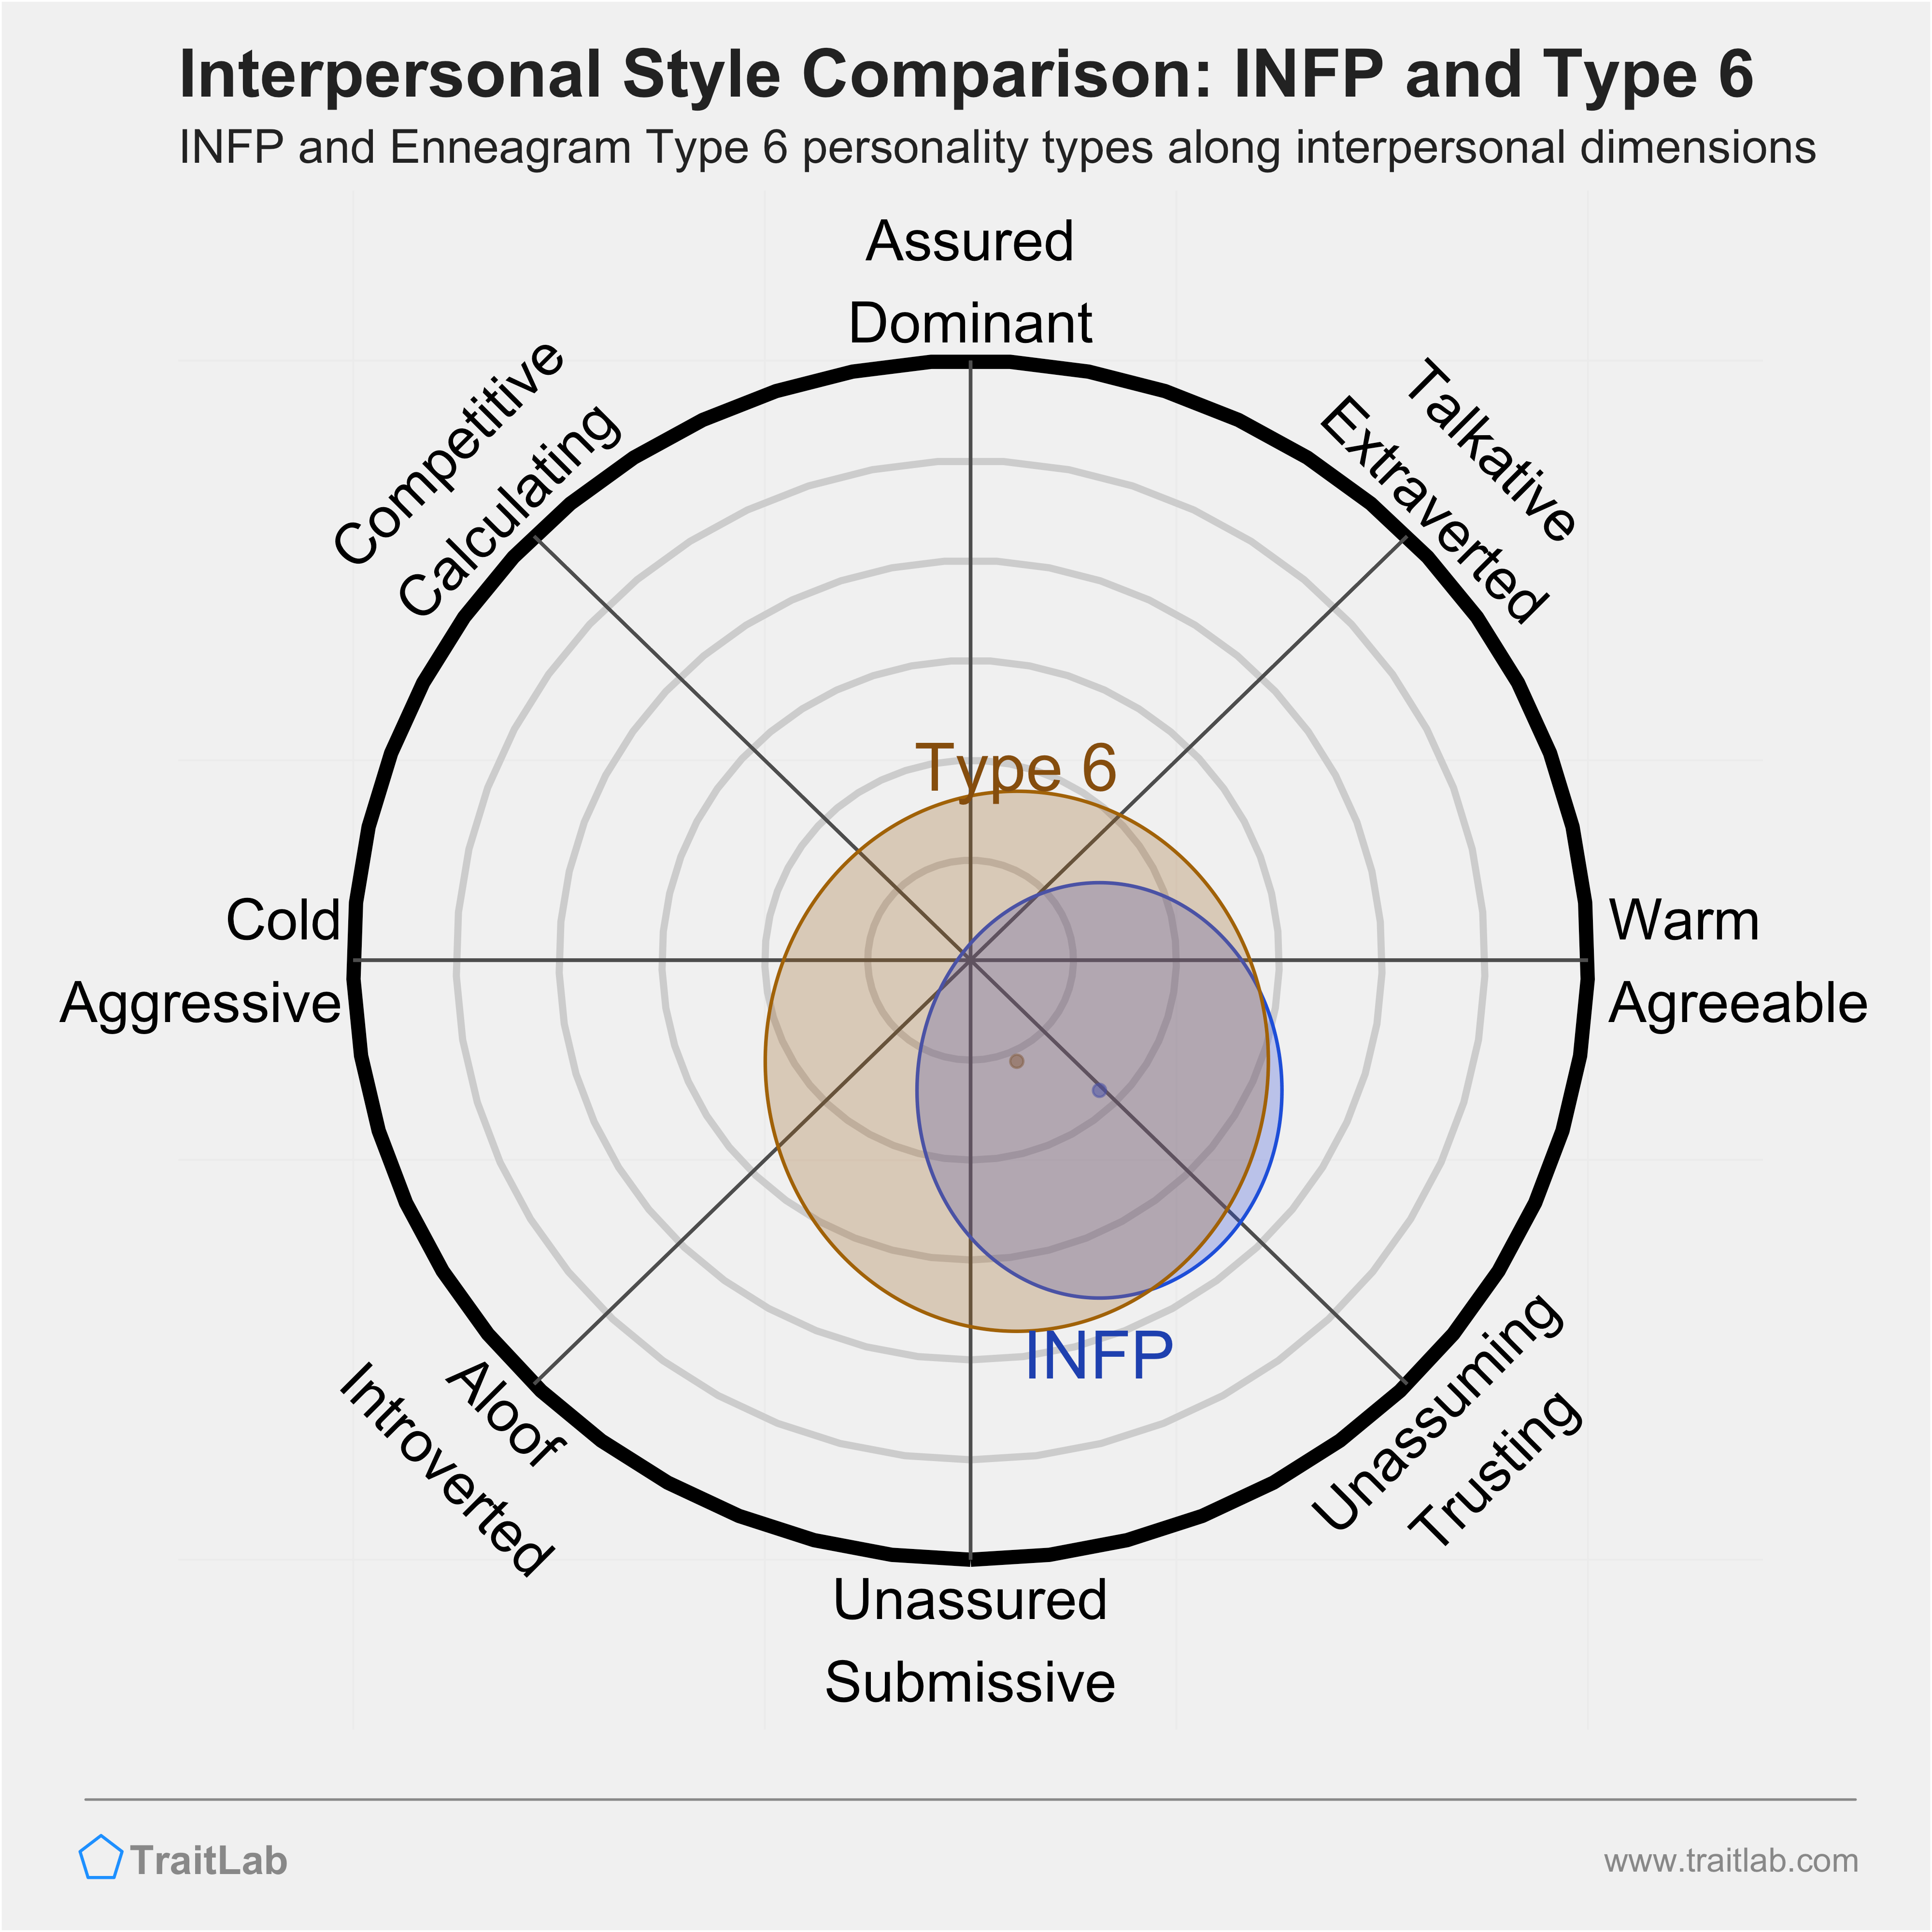 Enneagram INFP and Type 6 comparison across interpersonal dimensions